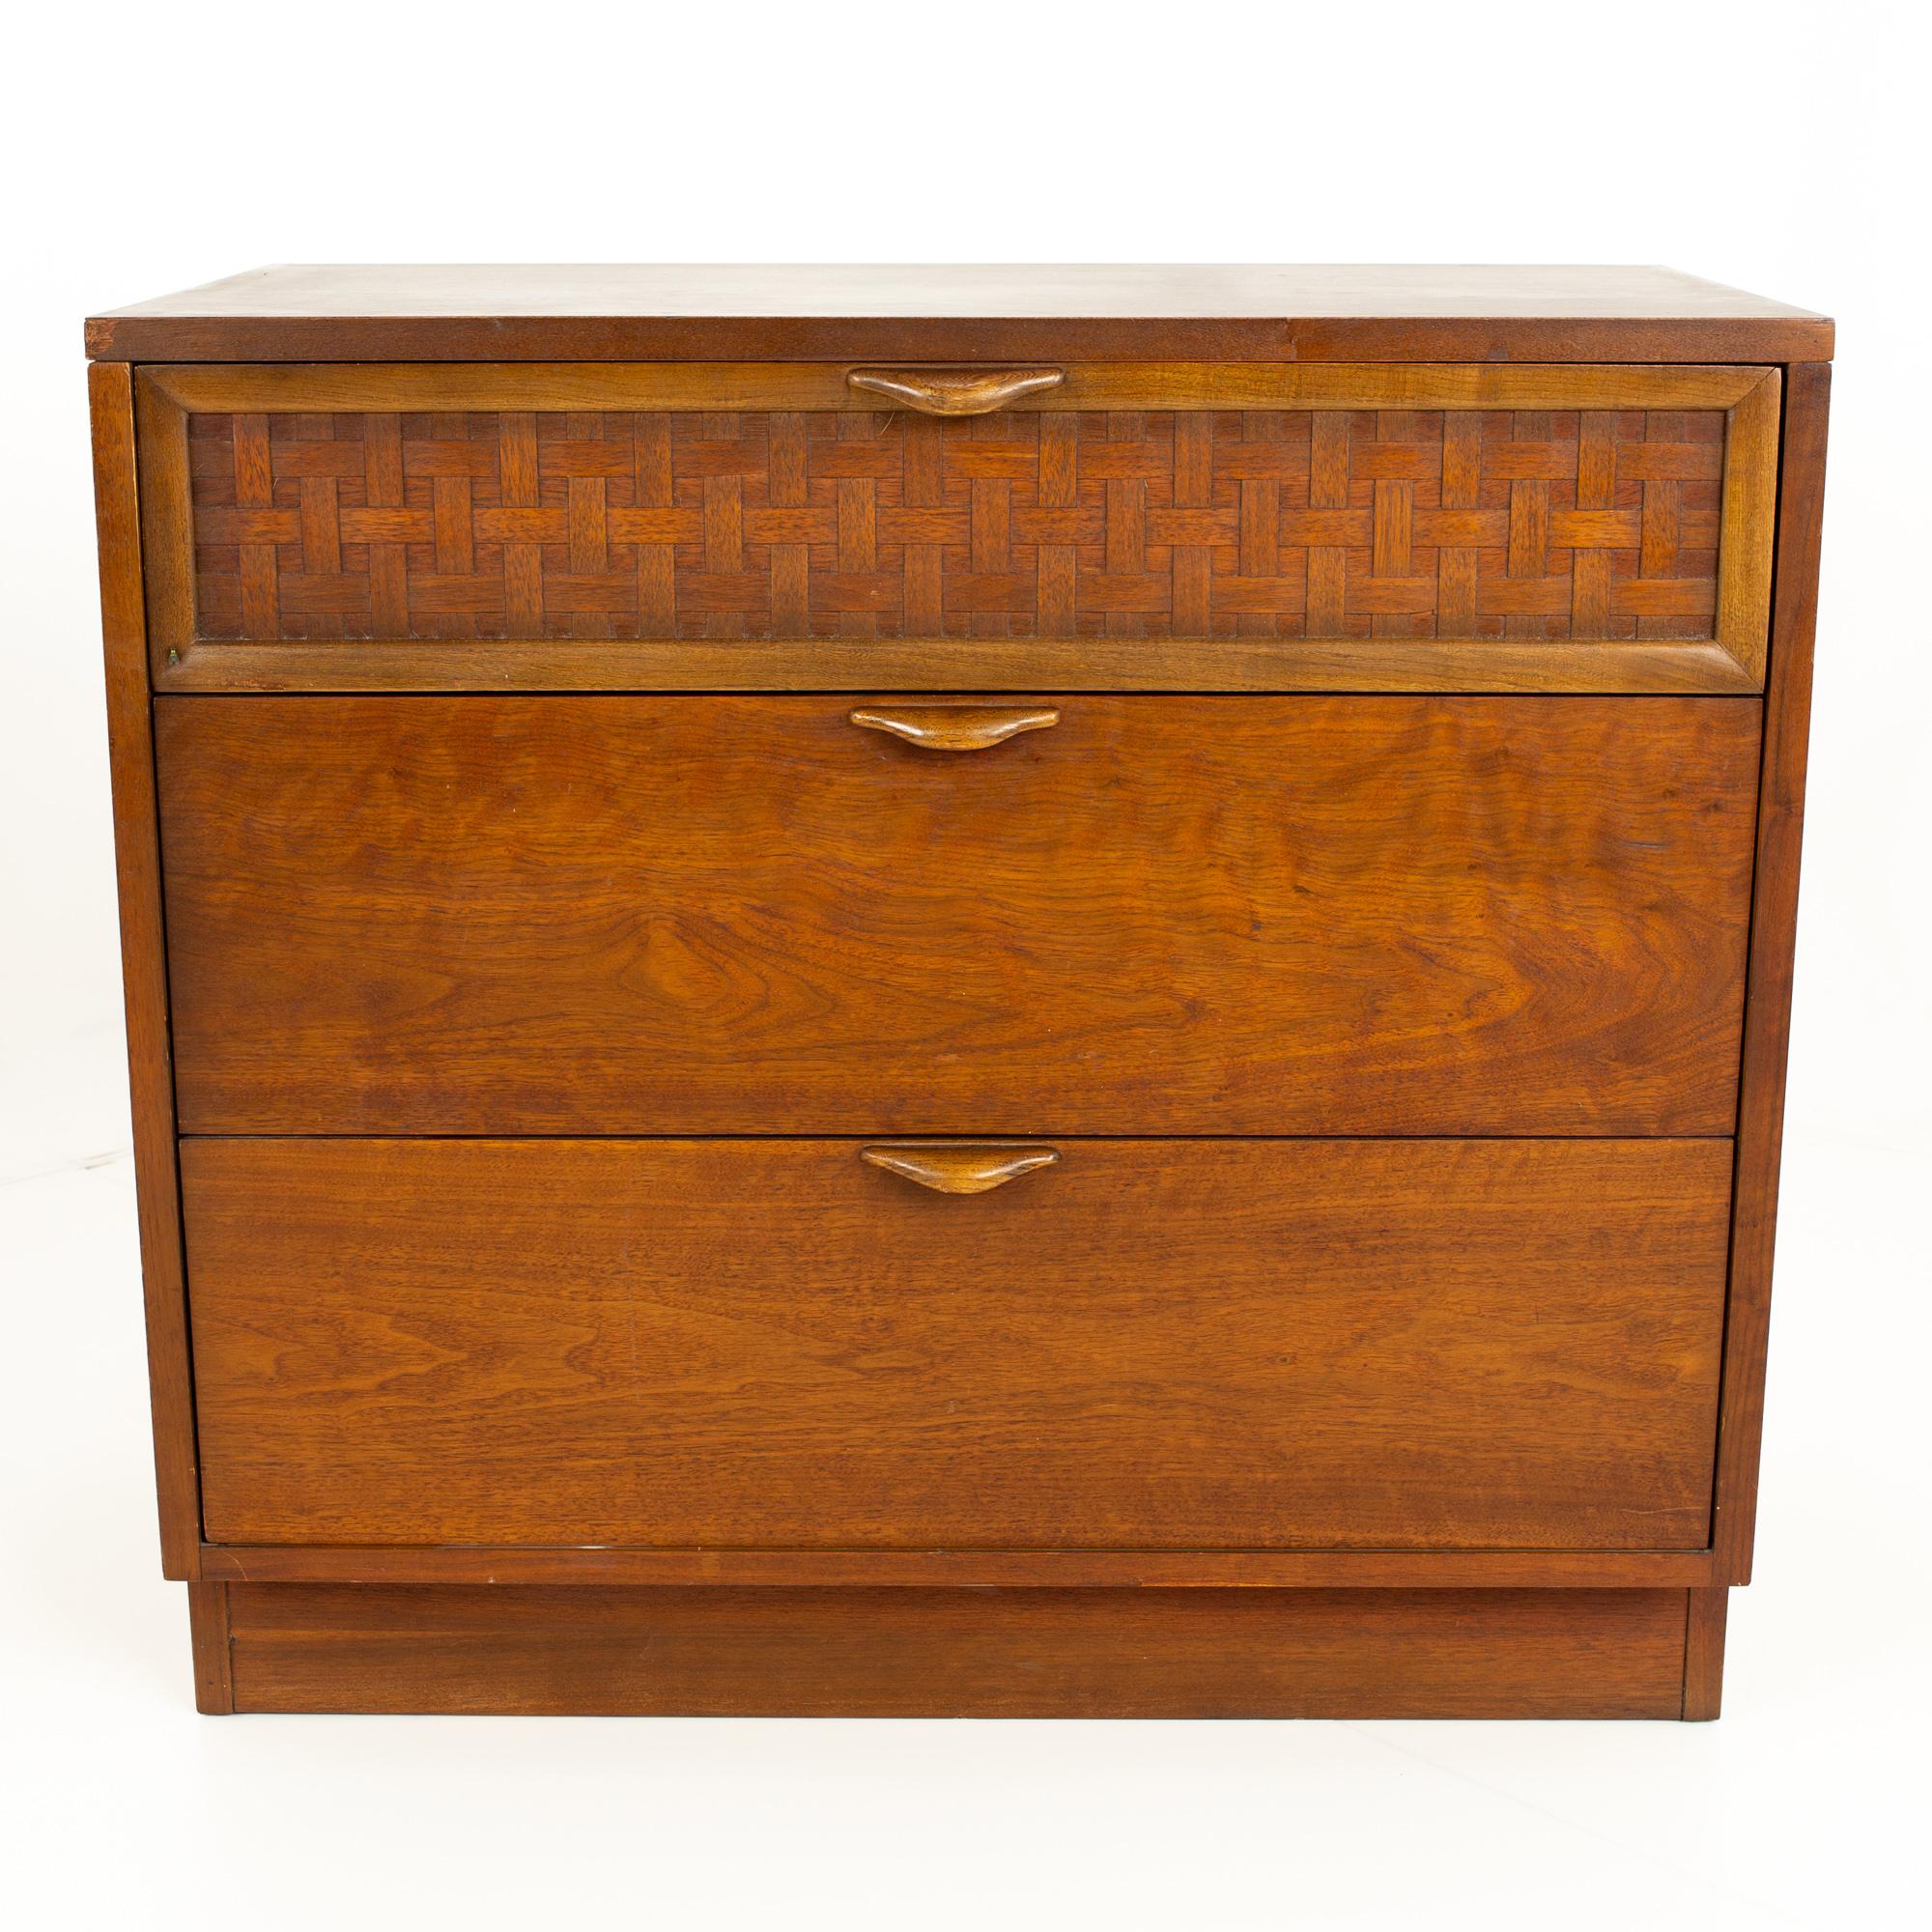 Lane Perception mid century Formica 3 drawer dresser chest 

This chest measures: 32 wide x 18 deep x 29.25 inches high 

All pieces of furniture can be had in what we call restored vintage condition. That means the piece is restored upon